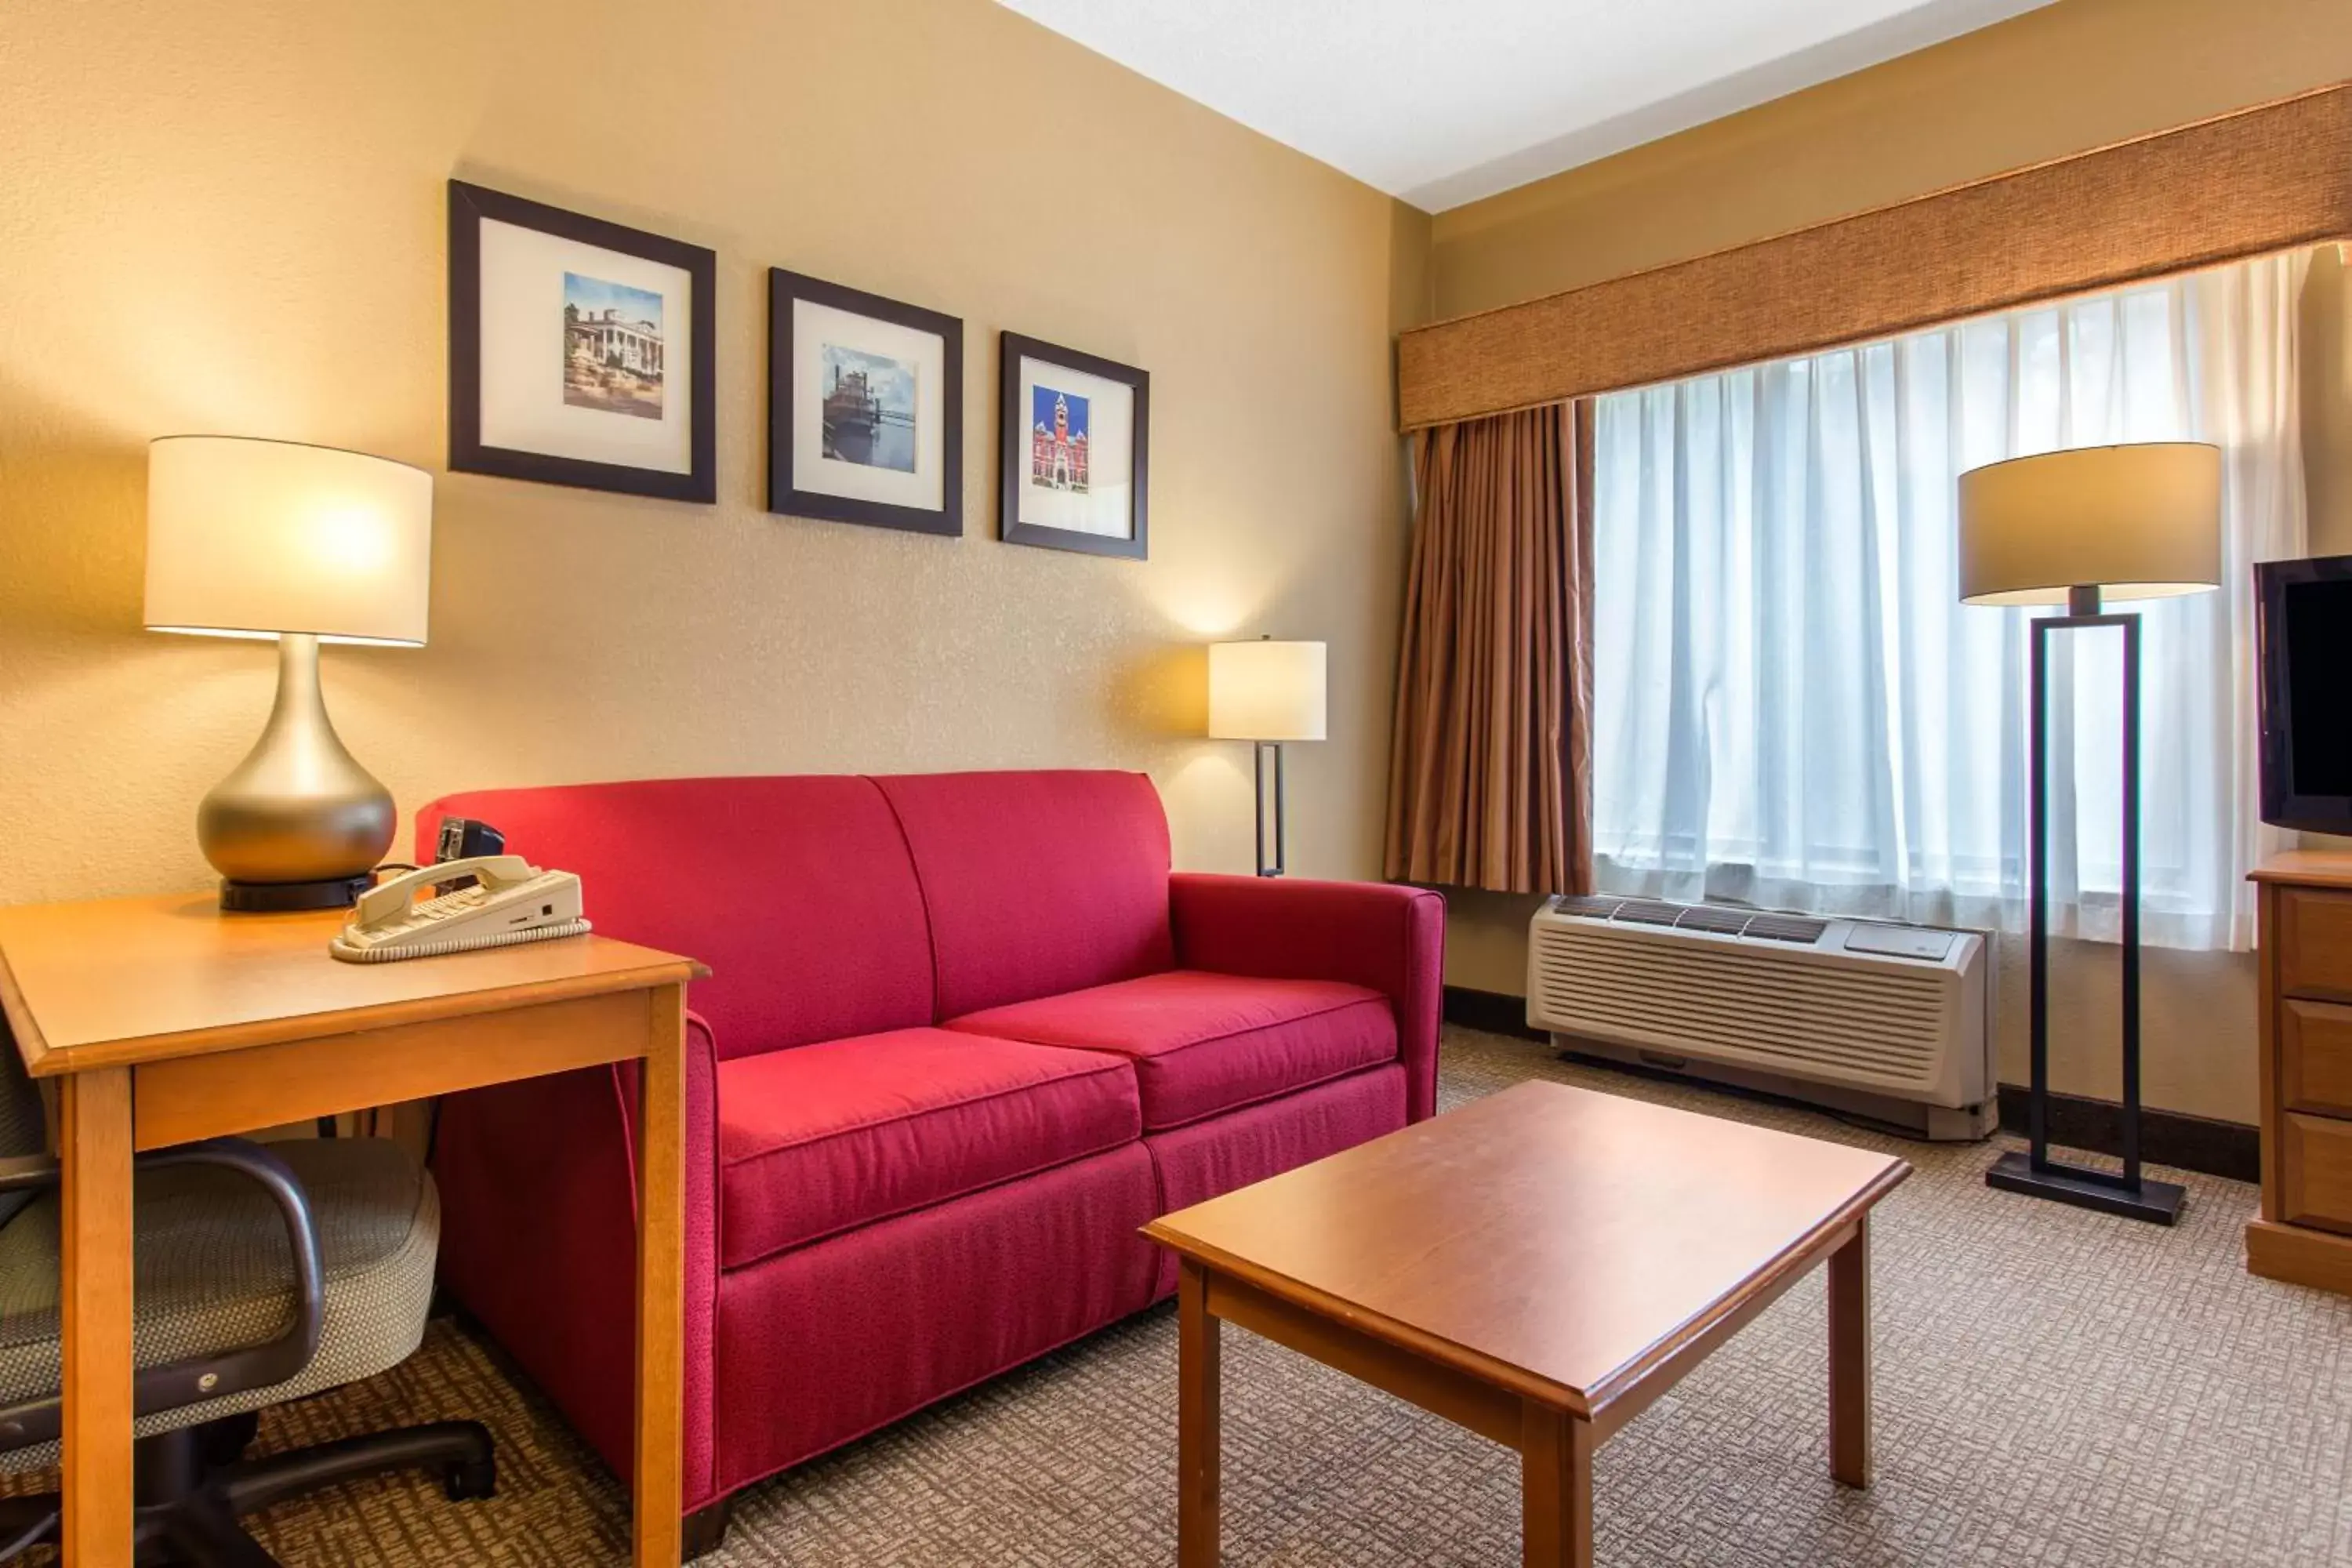 King Suite with Sofa Bed - Non-Smoking in Comfort Suites Wilmington near Downtown